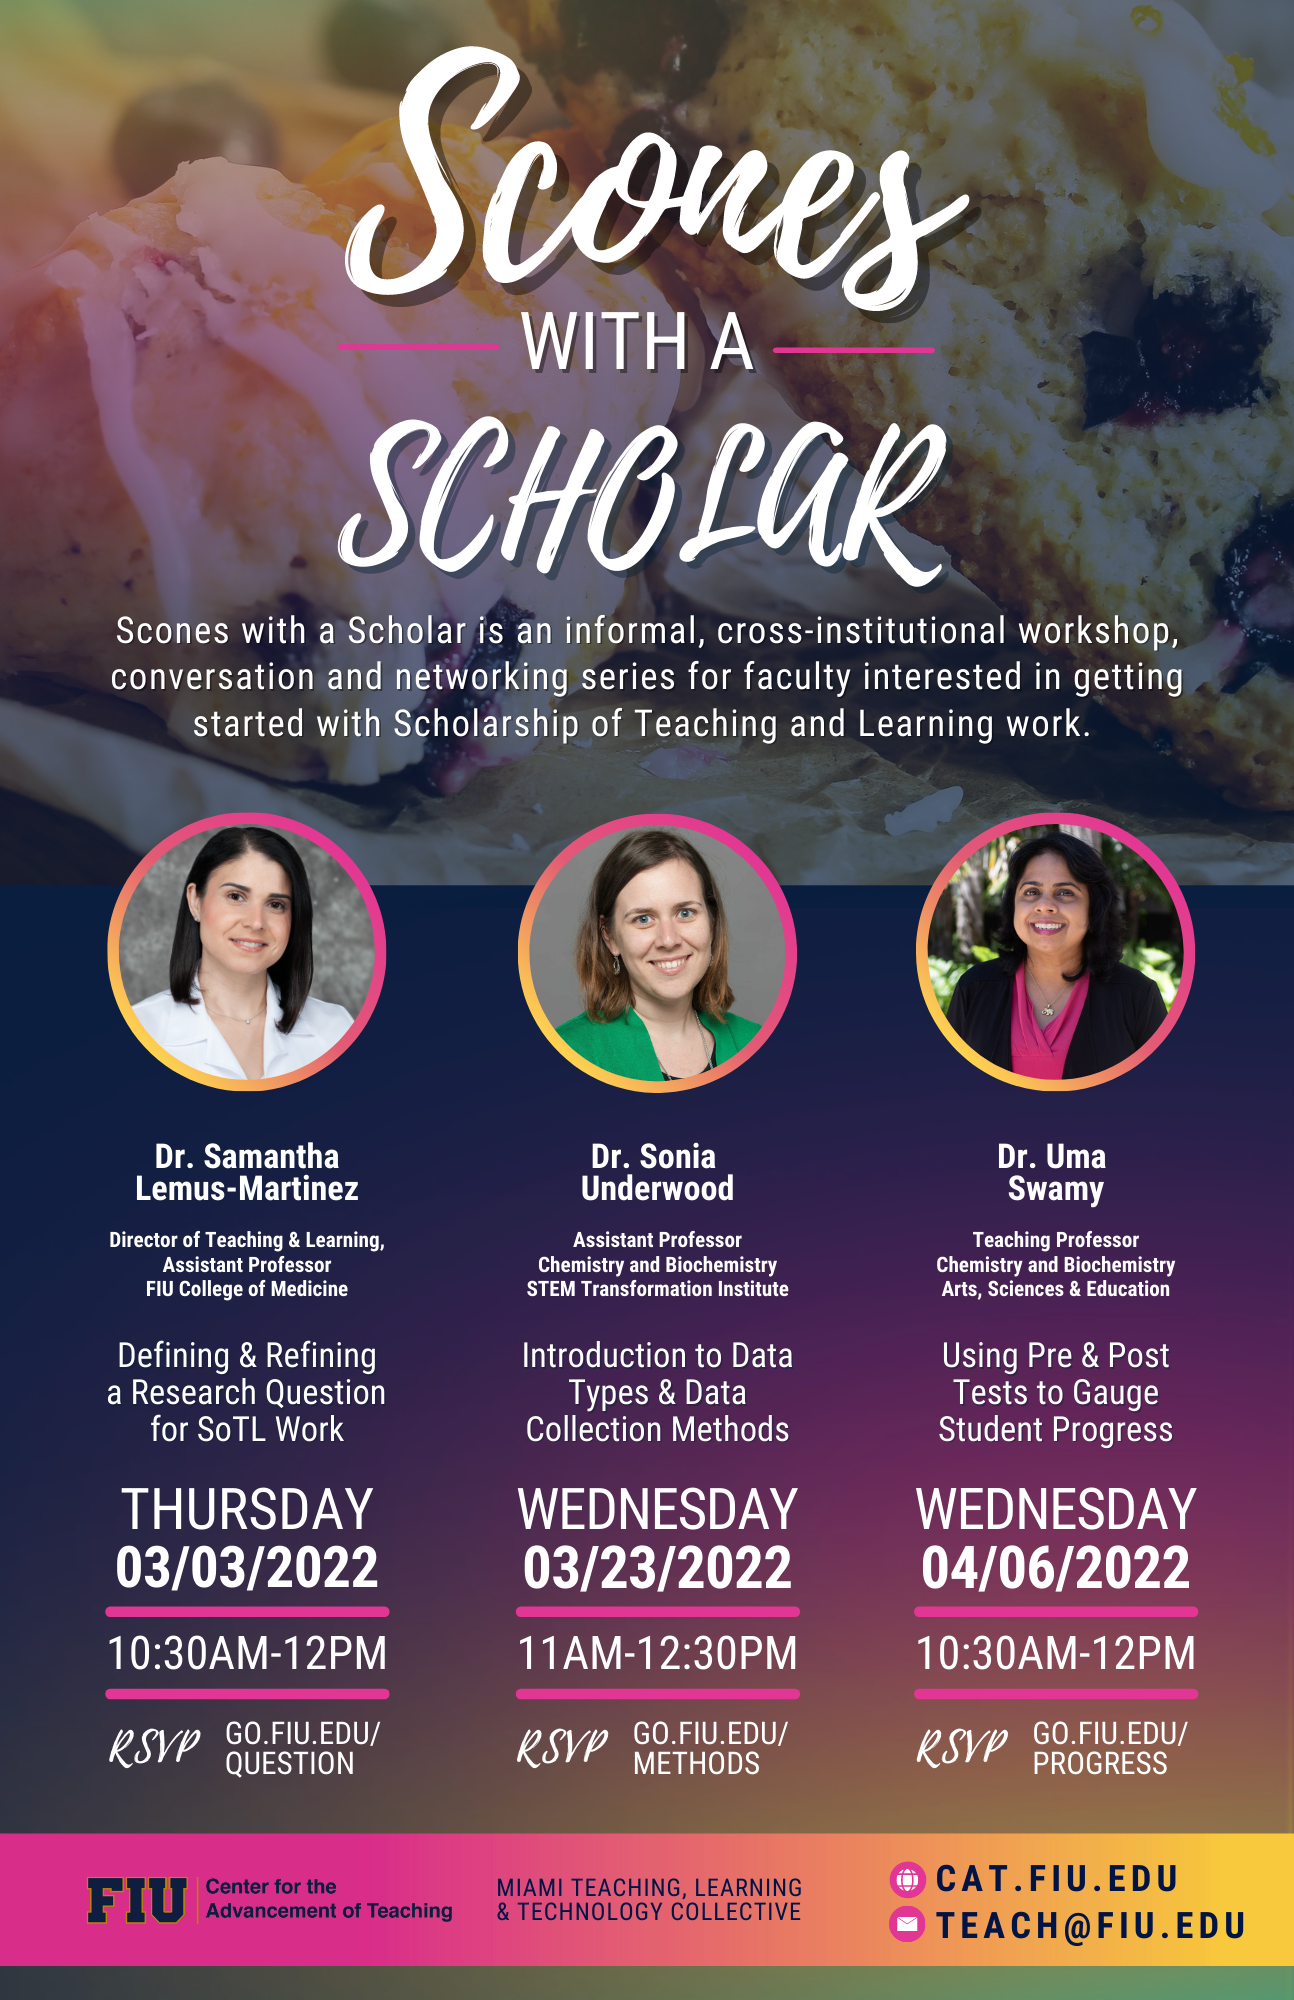 Scones with a Scholar is an informal, cross-institutional virtual workshop, conversation and networking series for faculty interested in getting started with Scholarship of Teaching and Learning work. Dr. Samantha Lemus Martinez will present Defining & Refining a Research Question for SoTL Work on March 3rd from 10:30 AM to 12 PM. Register at go.fiu.edu/question. Dr. Sonia Underwood will present Introduction to Data Types and Data Collection Methods on March 23rd from 11 AM to 12:30 PM. Register at go.fiu.edu/methods. Dr. Uma Swamy will present Using Pre and Post Tests to Gauge Student Progress on April 6th from 10:30 AM to 12 PM. Register at go.fiu.edu/pogress.